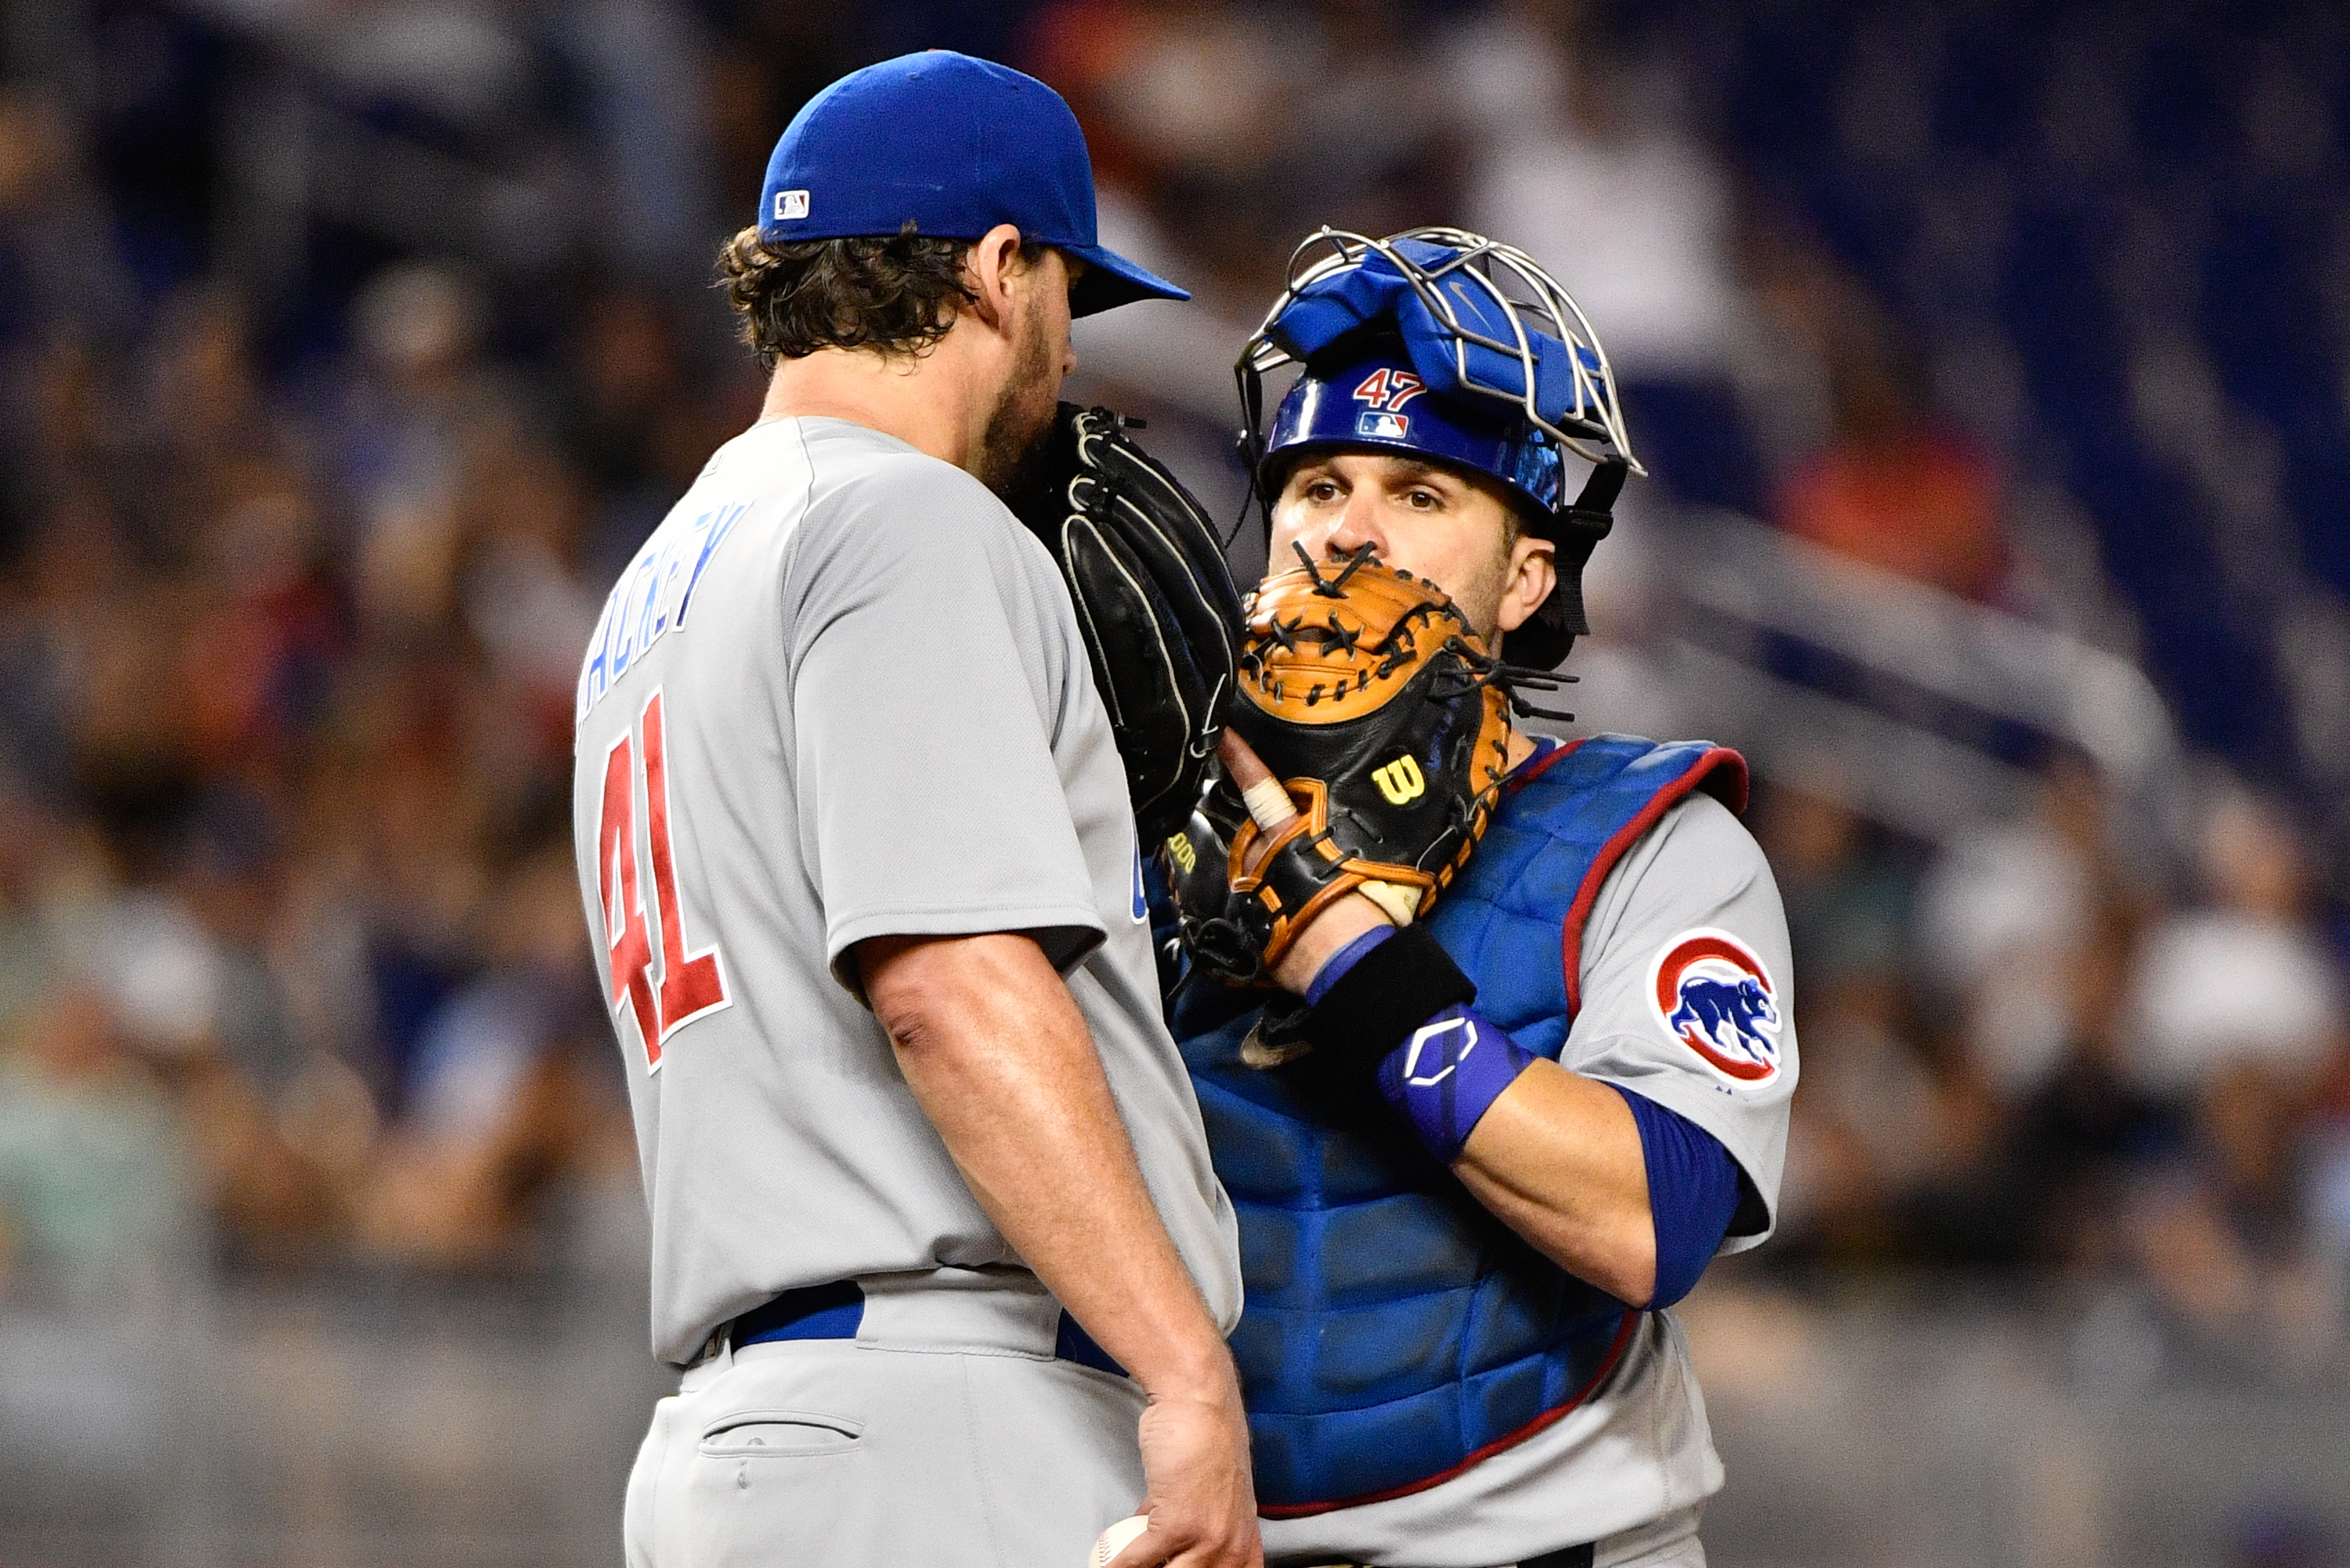 Cubs catcher Miguel Montero blames pitchers for why Trea Turner and  Nationals kept stealing – New York Daily News